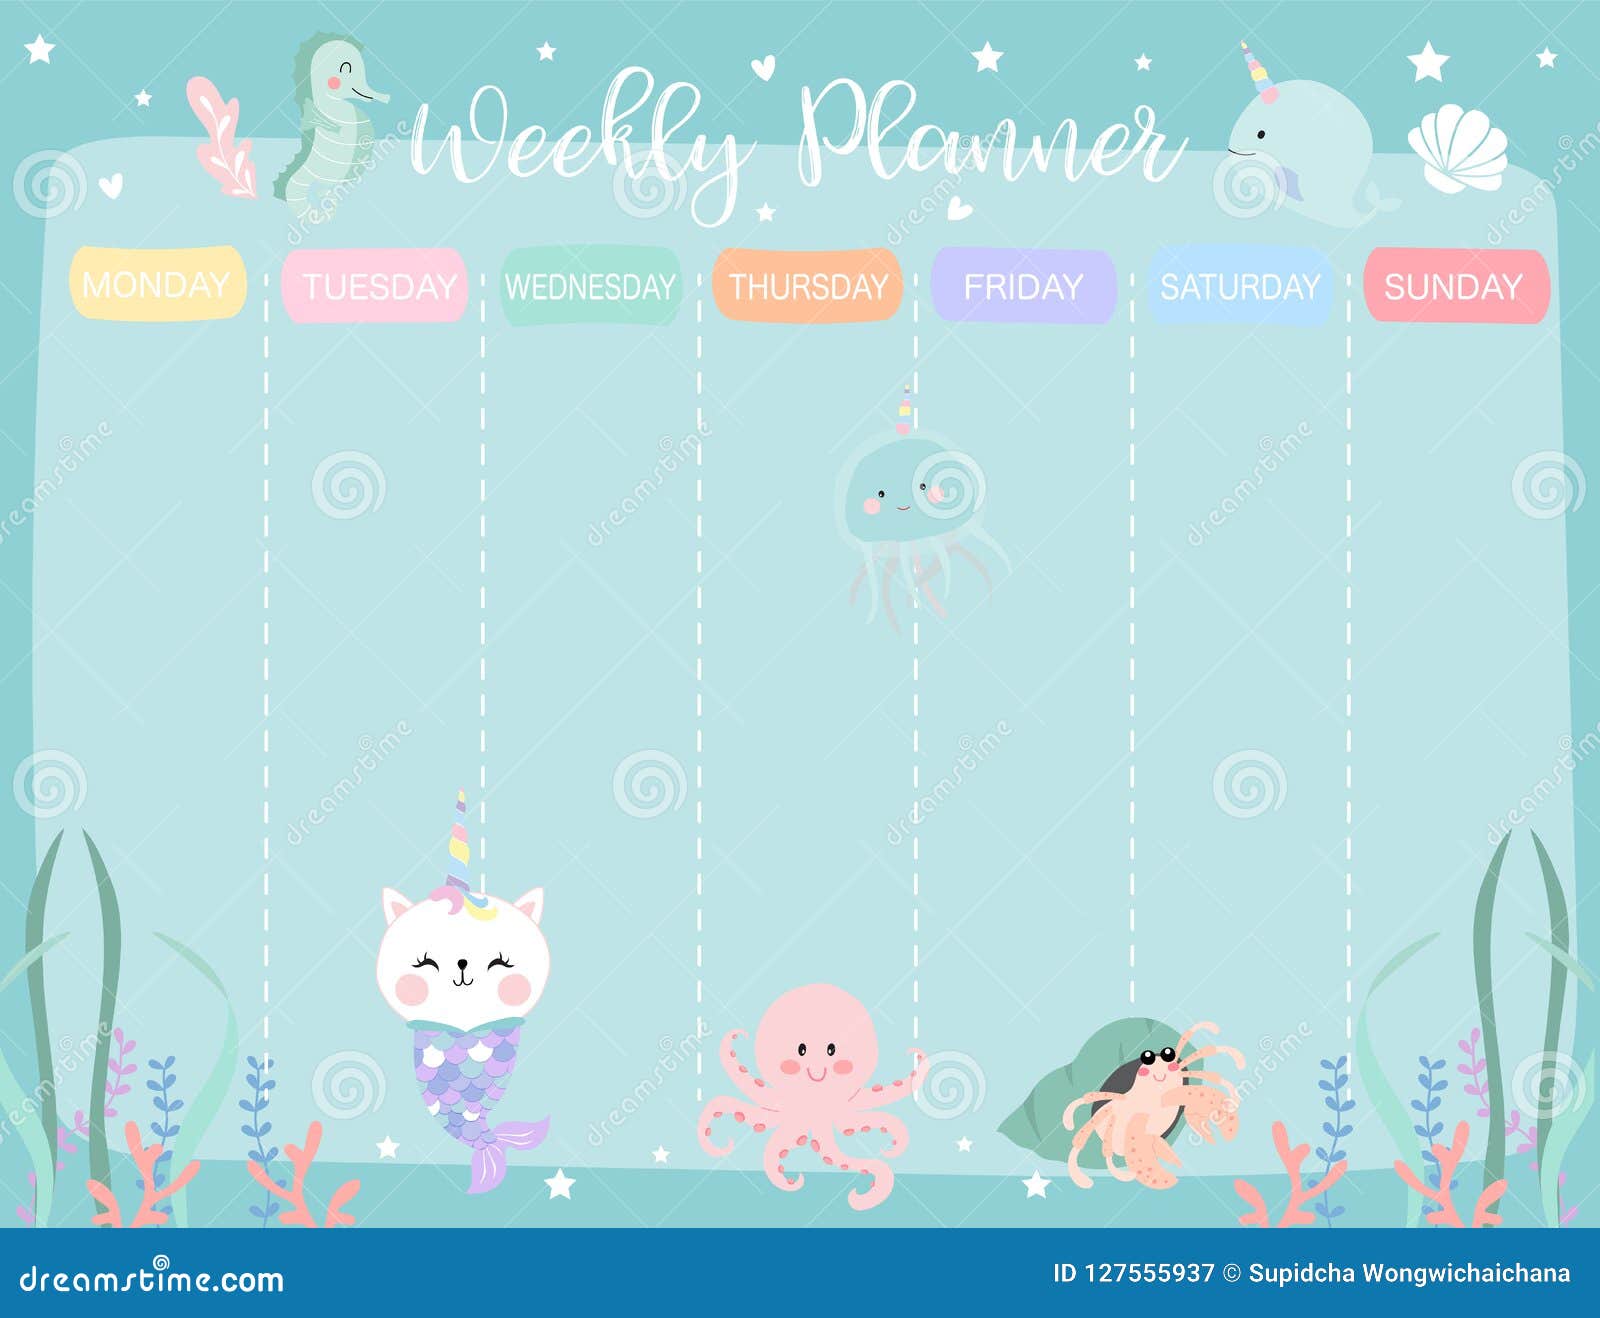 pastel weekly calendar planner with little mermaid,caticorn,squid,coral and sea horse